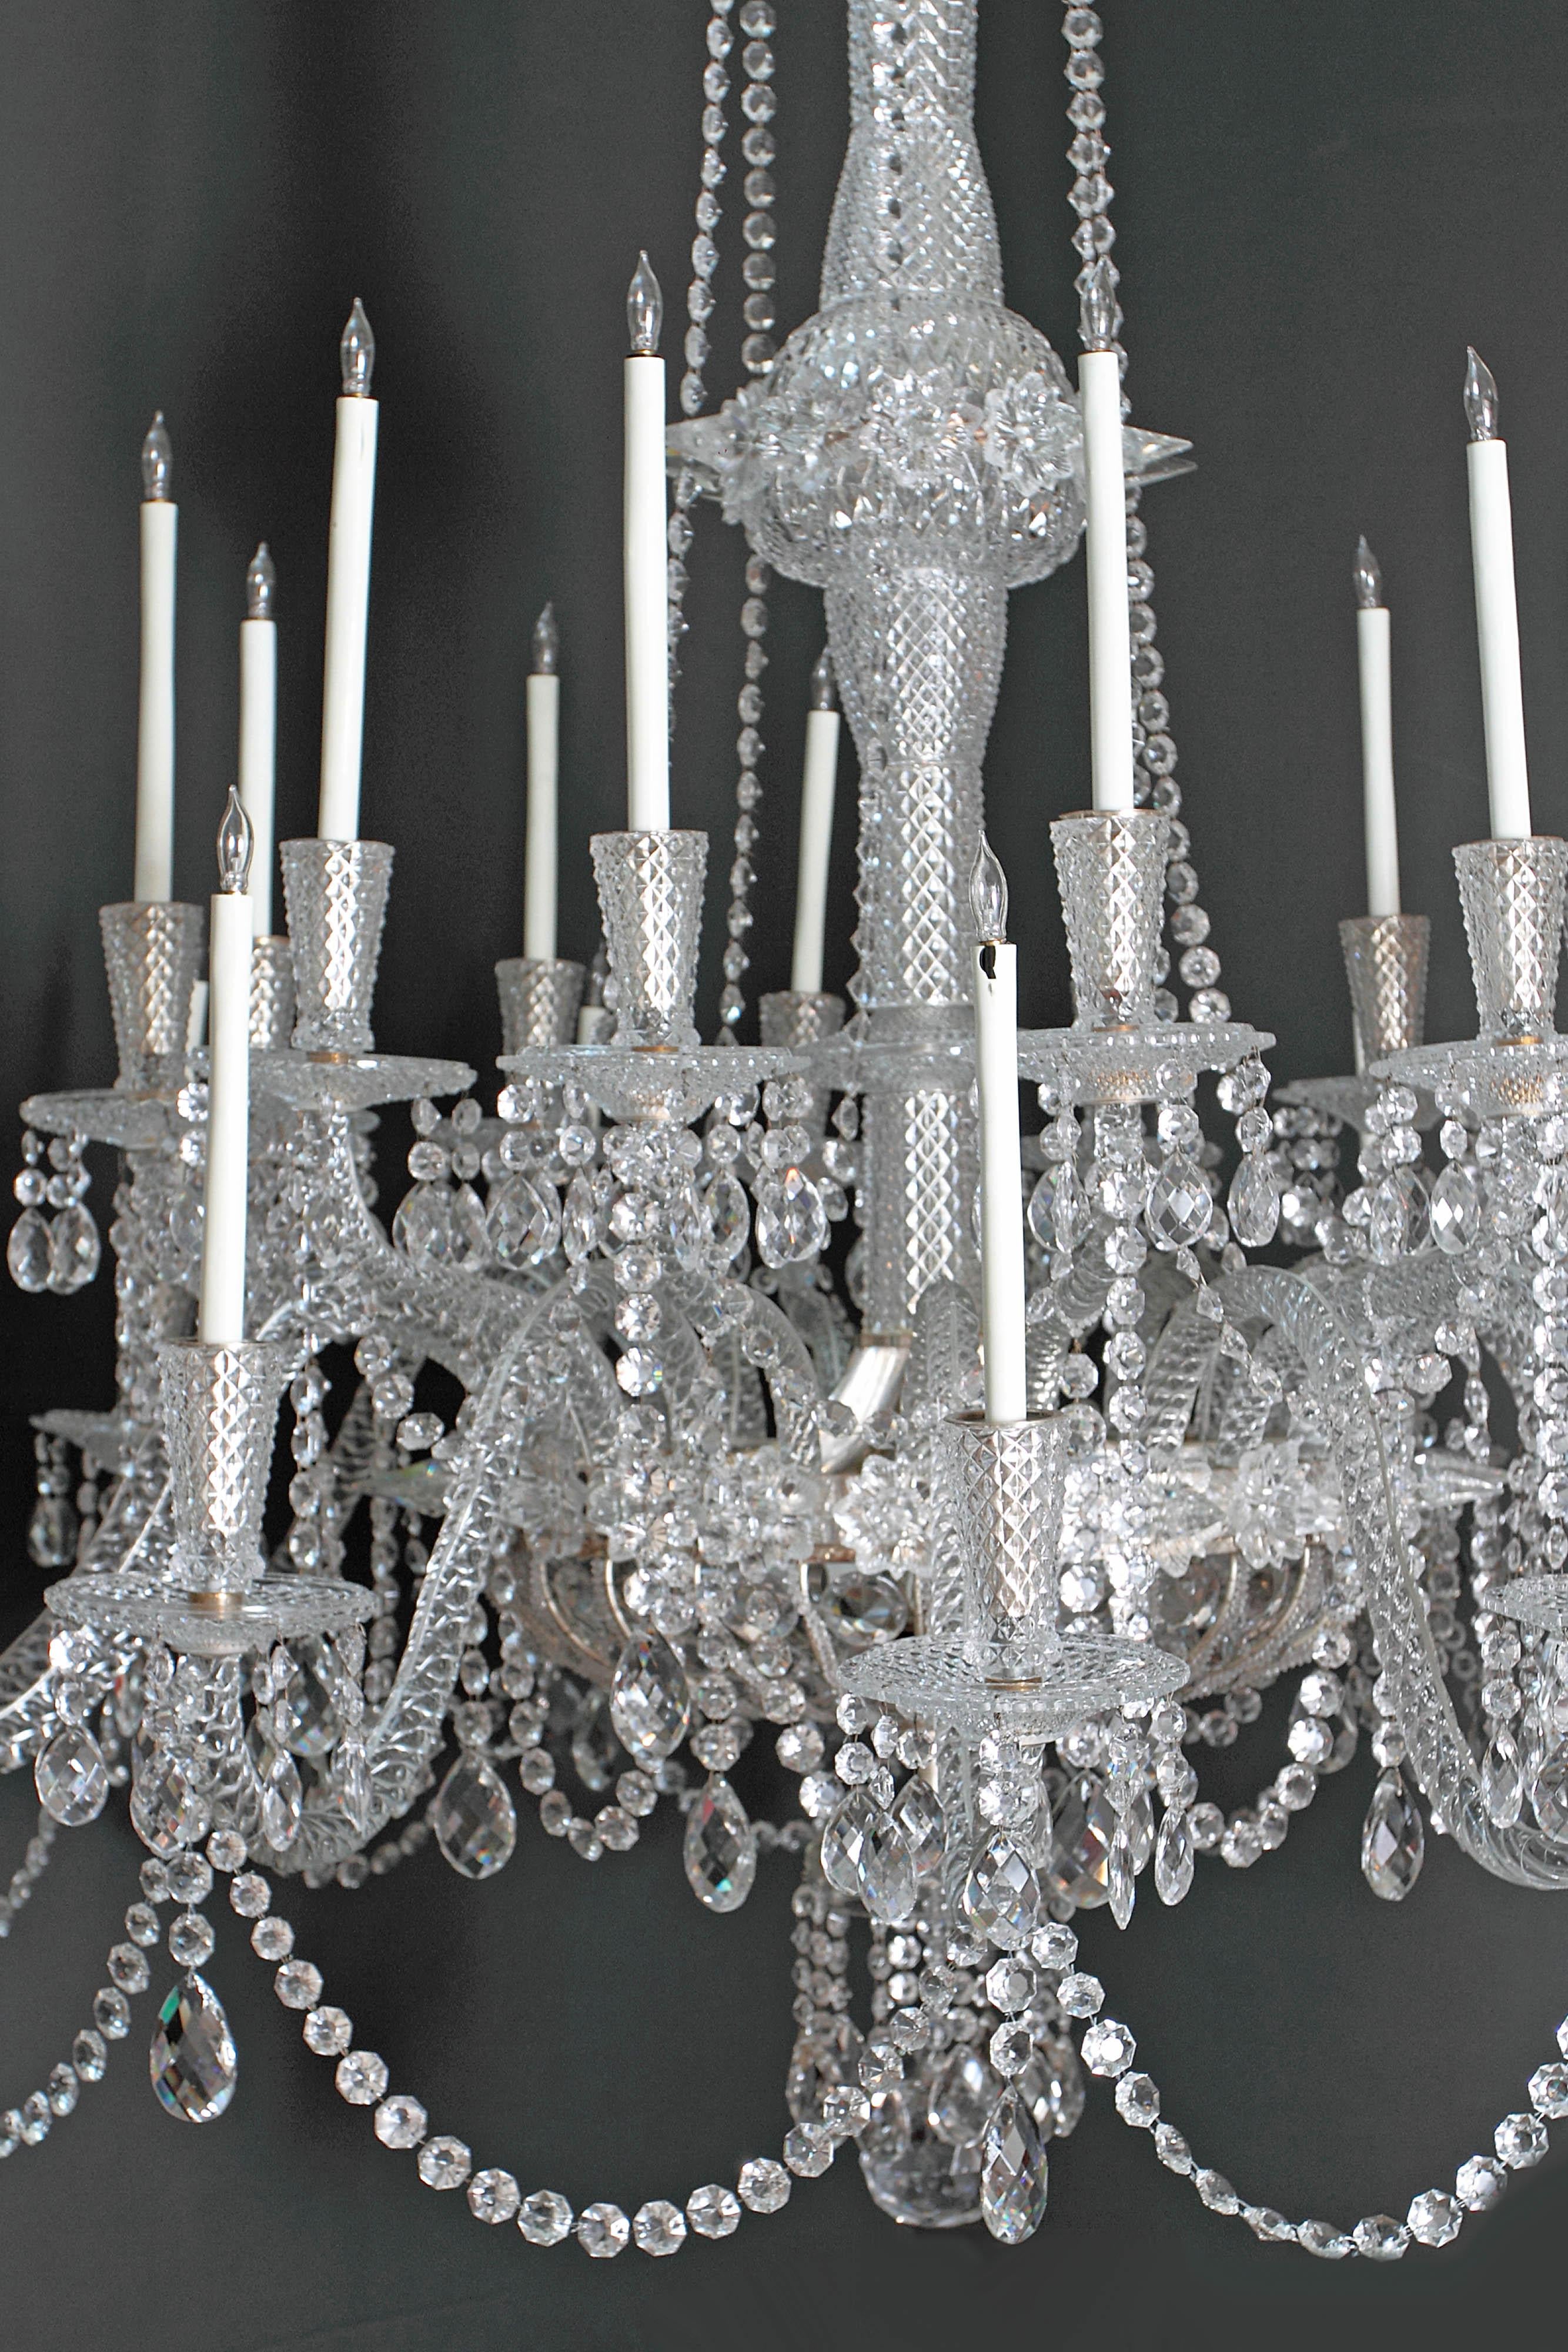 Pair of Grand Scale Mid-Victorian 24-Light Cut-Crystal Chandeliers For Sale 5